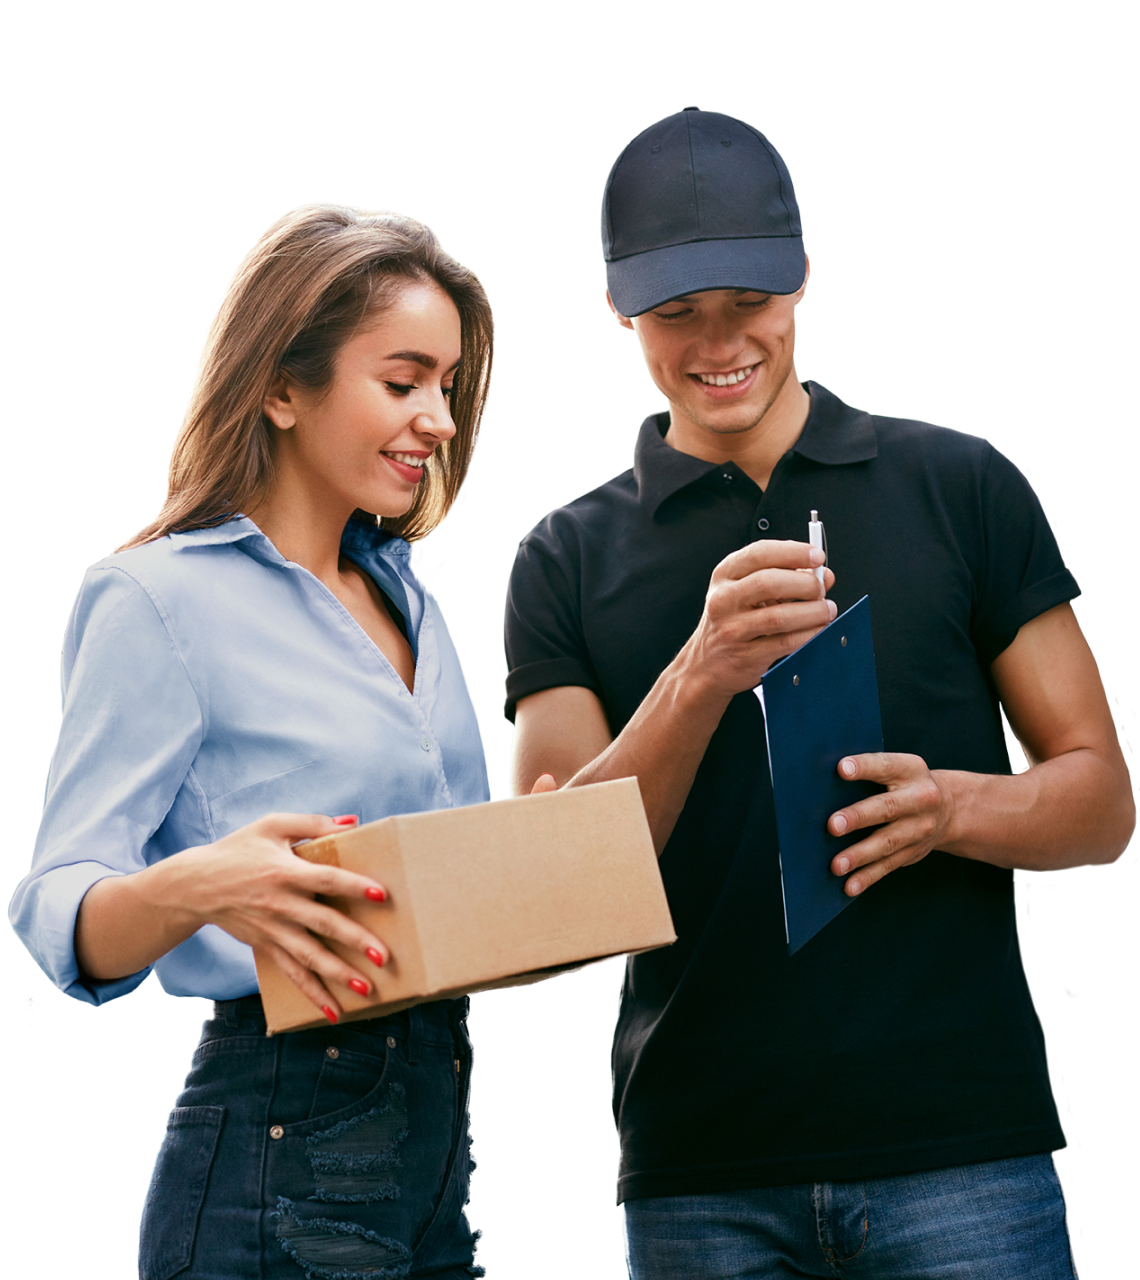 The fastest Online Food Delivery service in India - Order delivery - Borzo Couriers